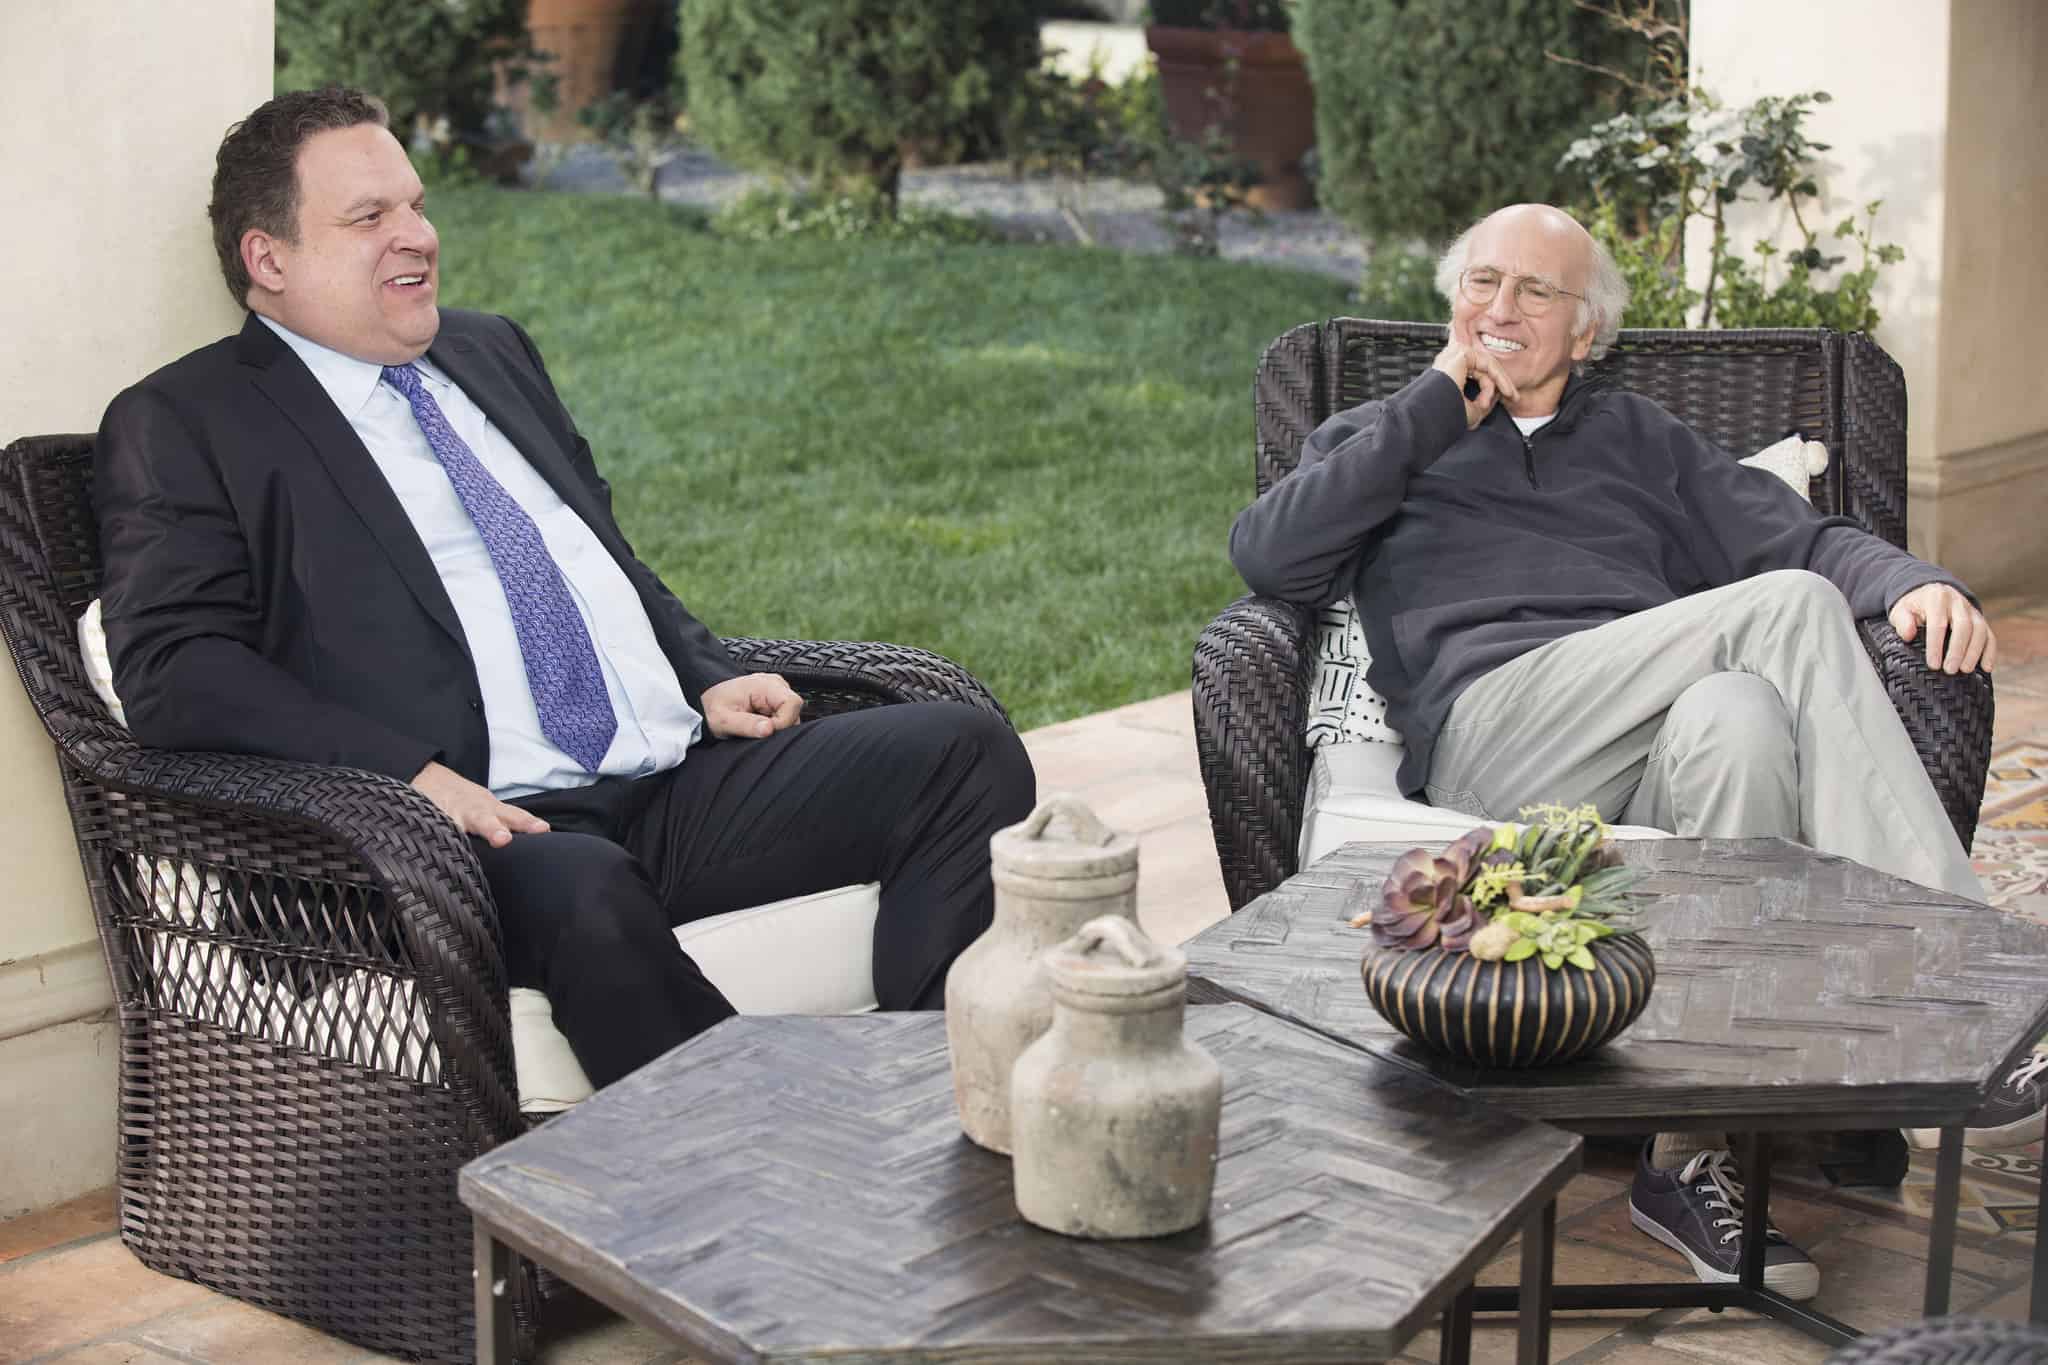 Two men sit on a garden patio in this image from HBO.